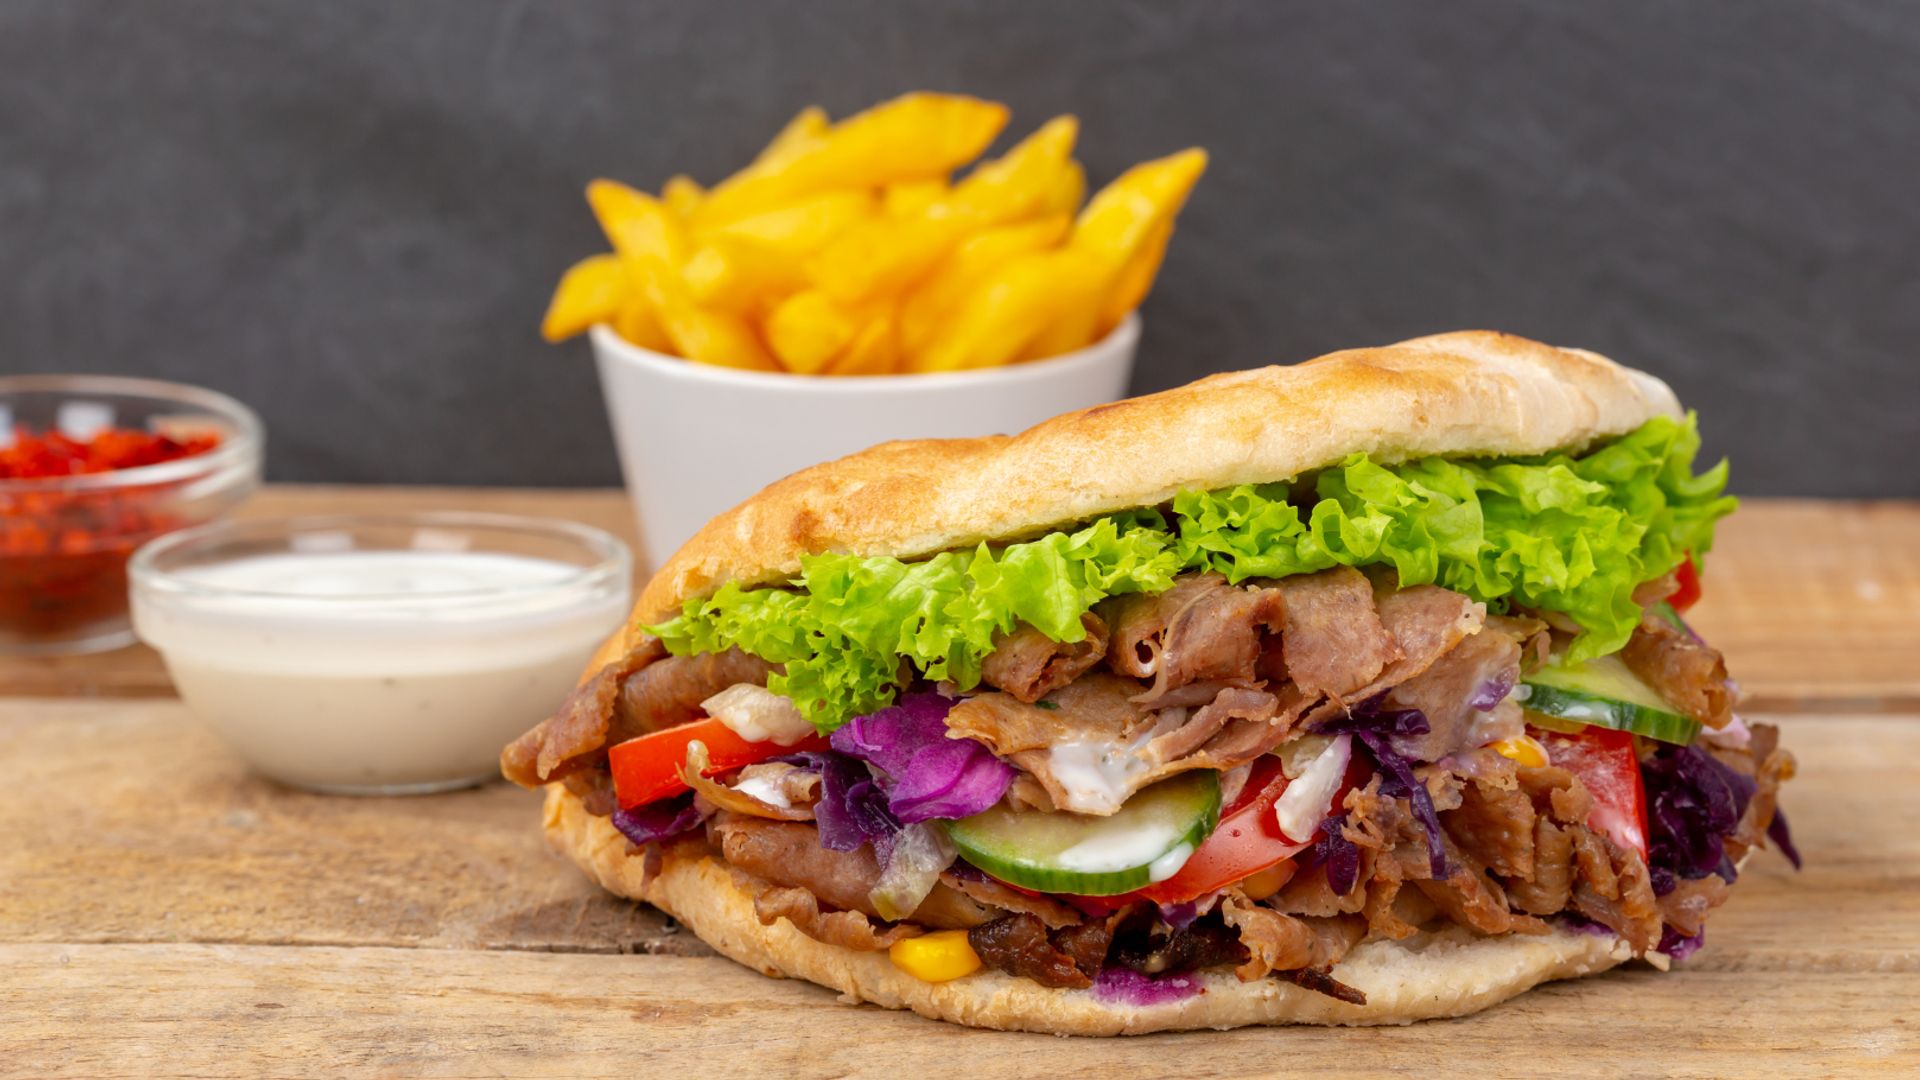 Calls for kebabs to be subsidised in Germany